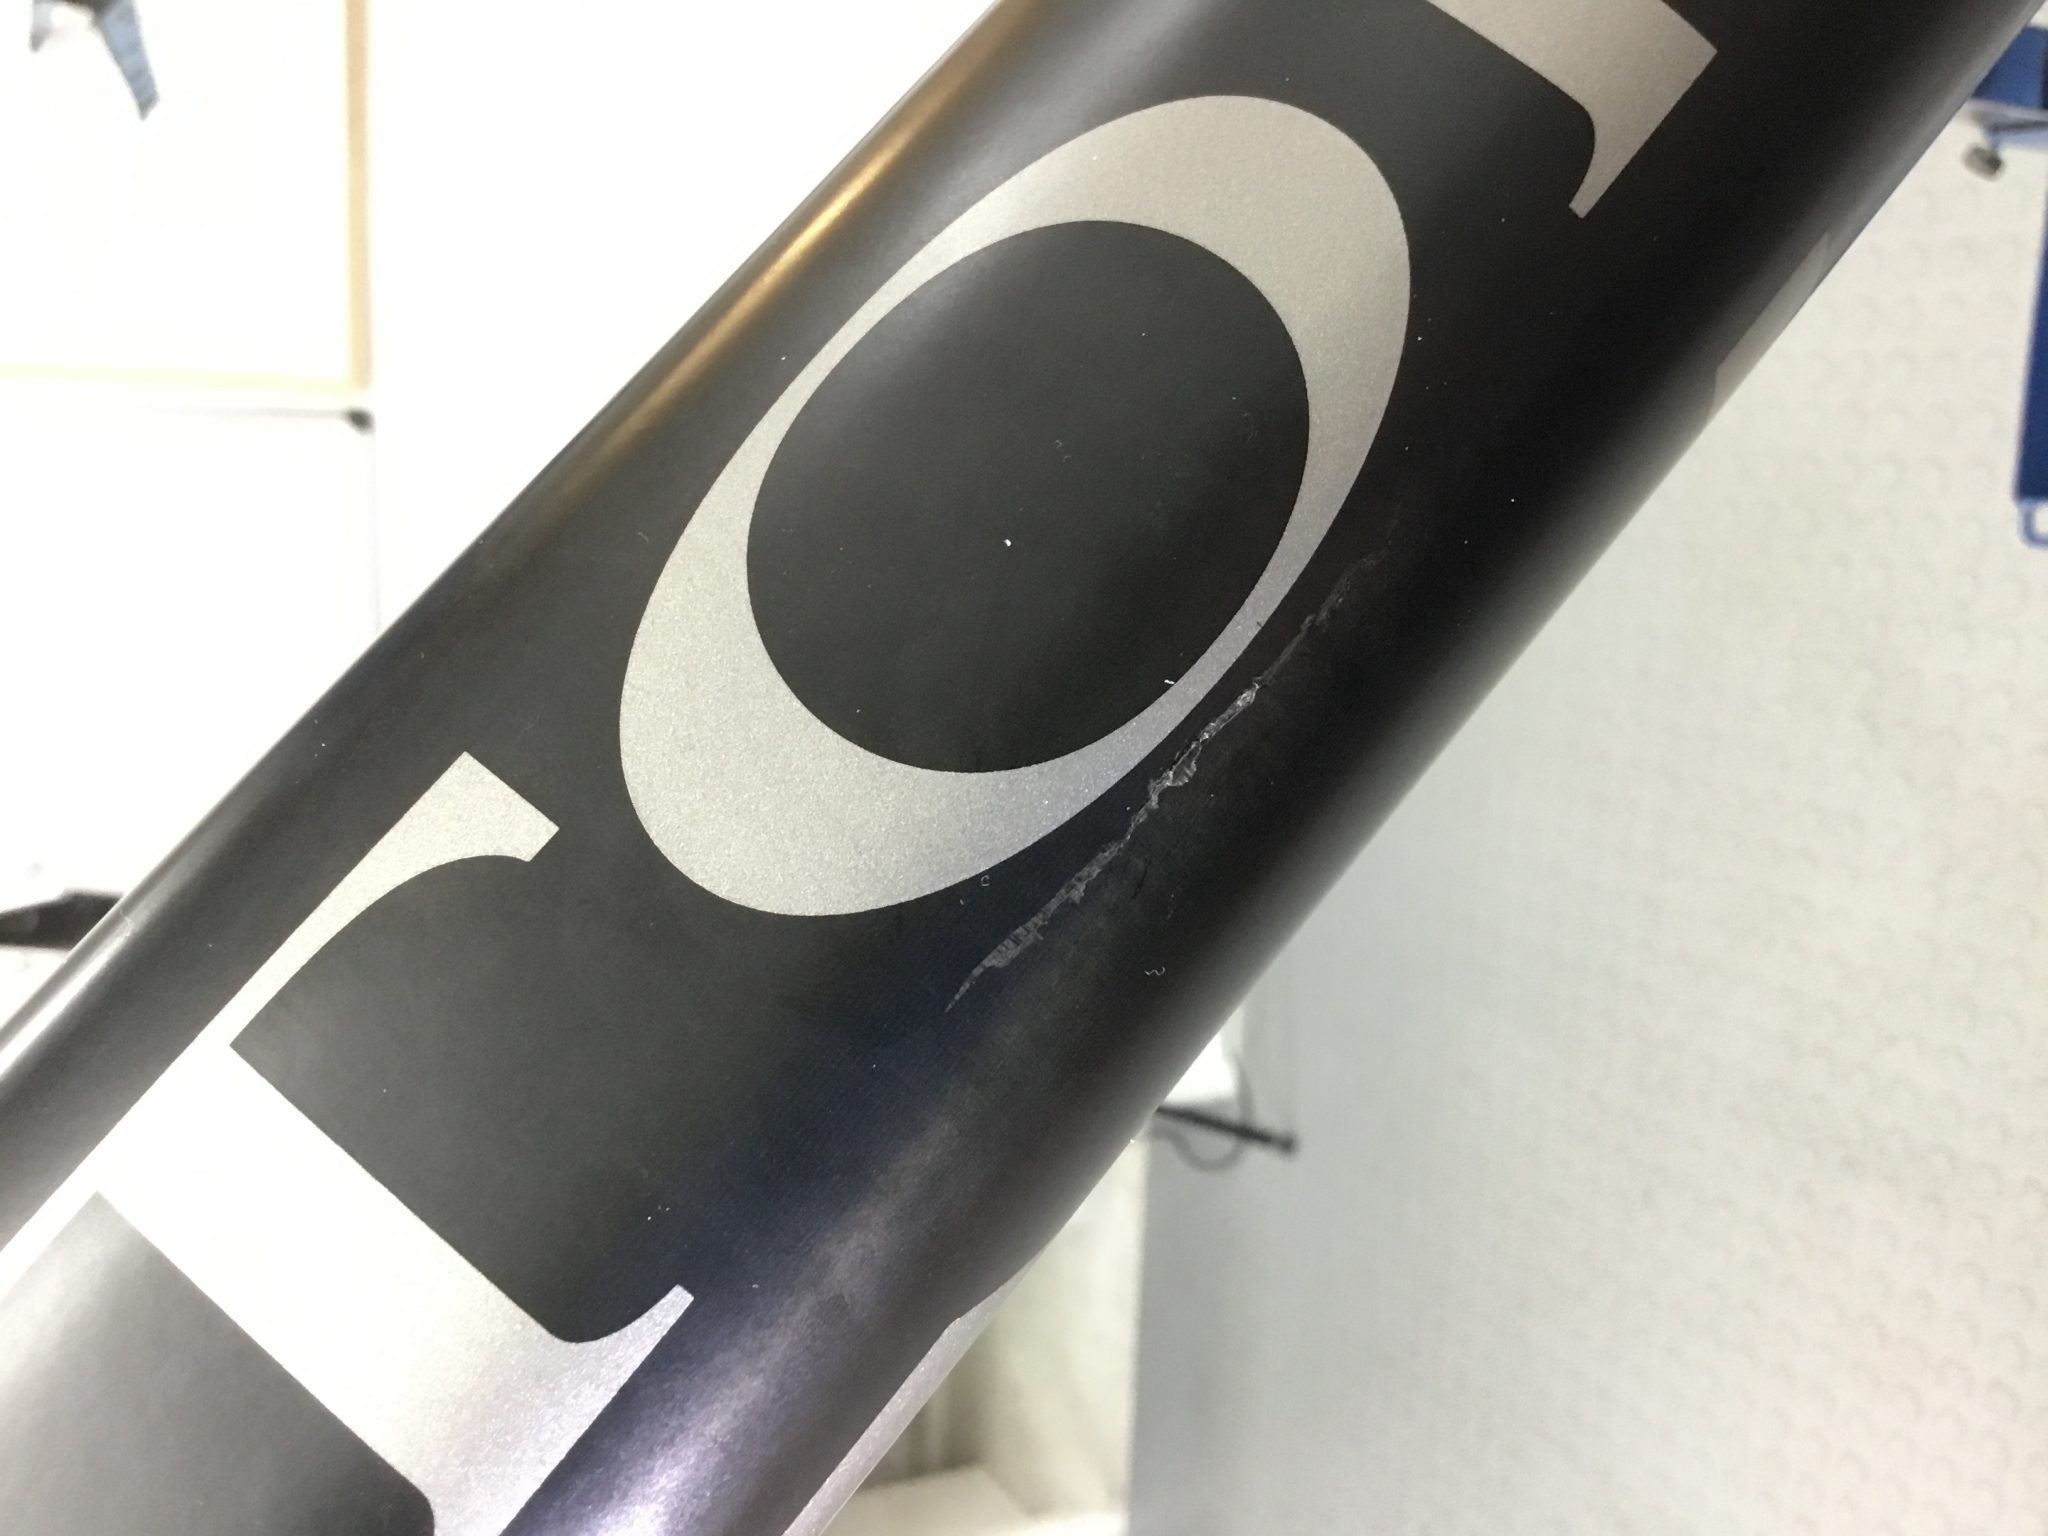 carbon frame cracked in a cycle carrier